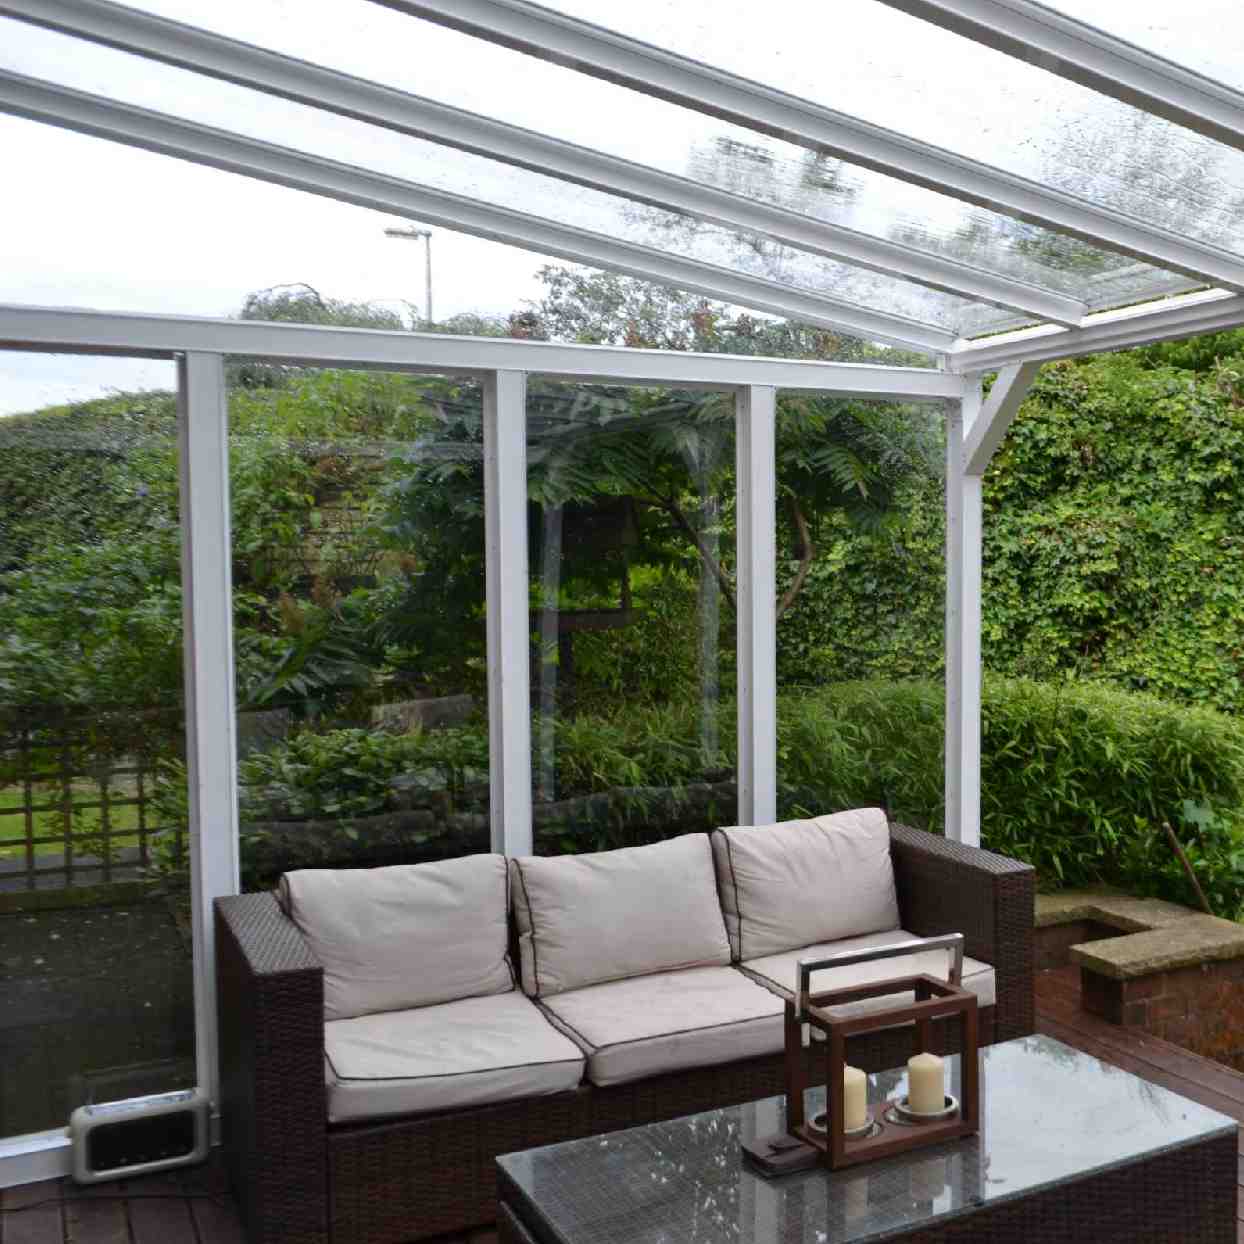 Buy Omega Verandah White with 6mm Glass Clear Plate Polycarbonate Glazing - 10.5m (W) x 2.5m (P), (5) Supporting Posts online today